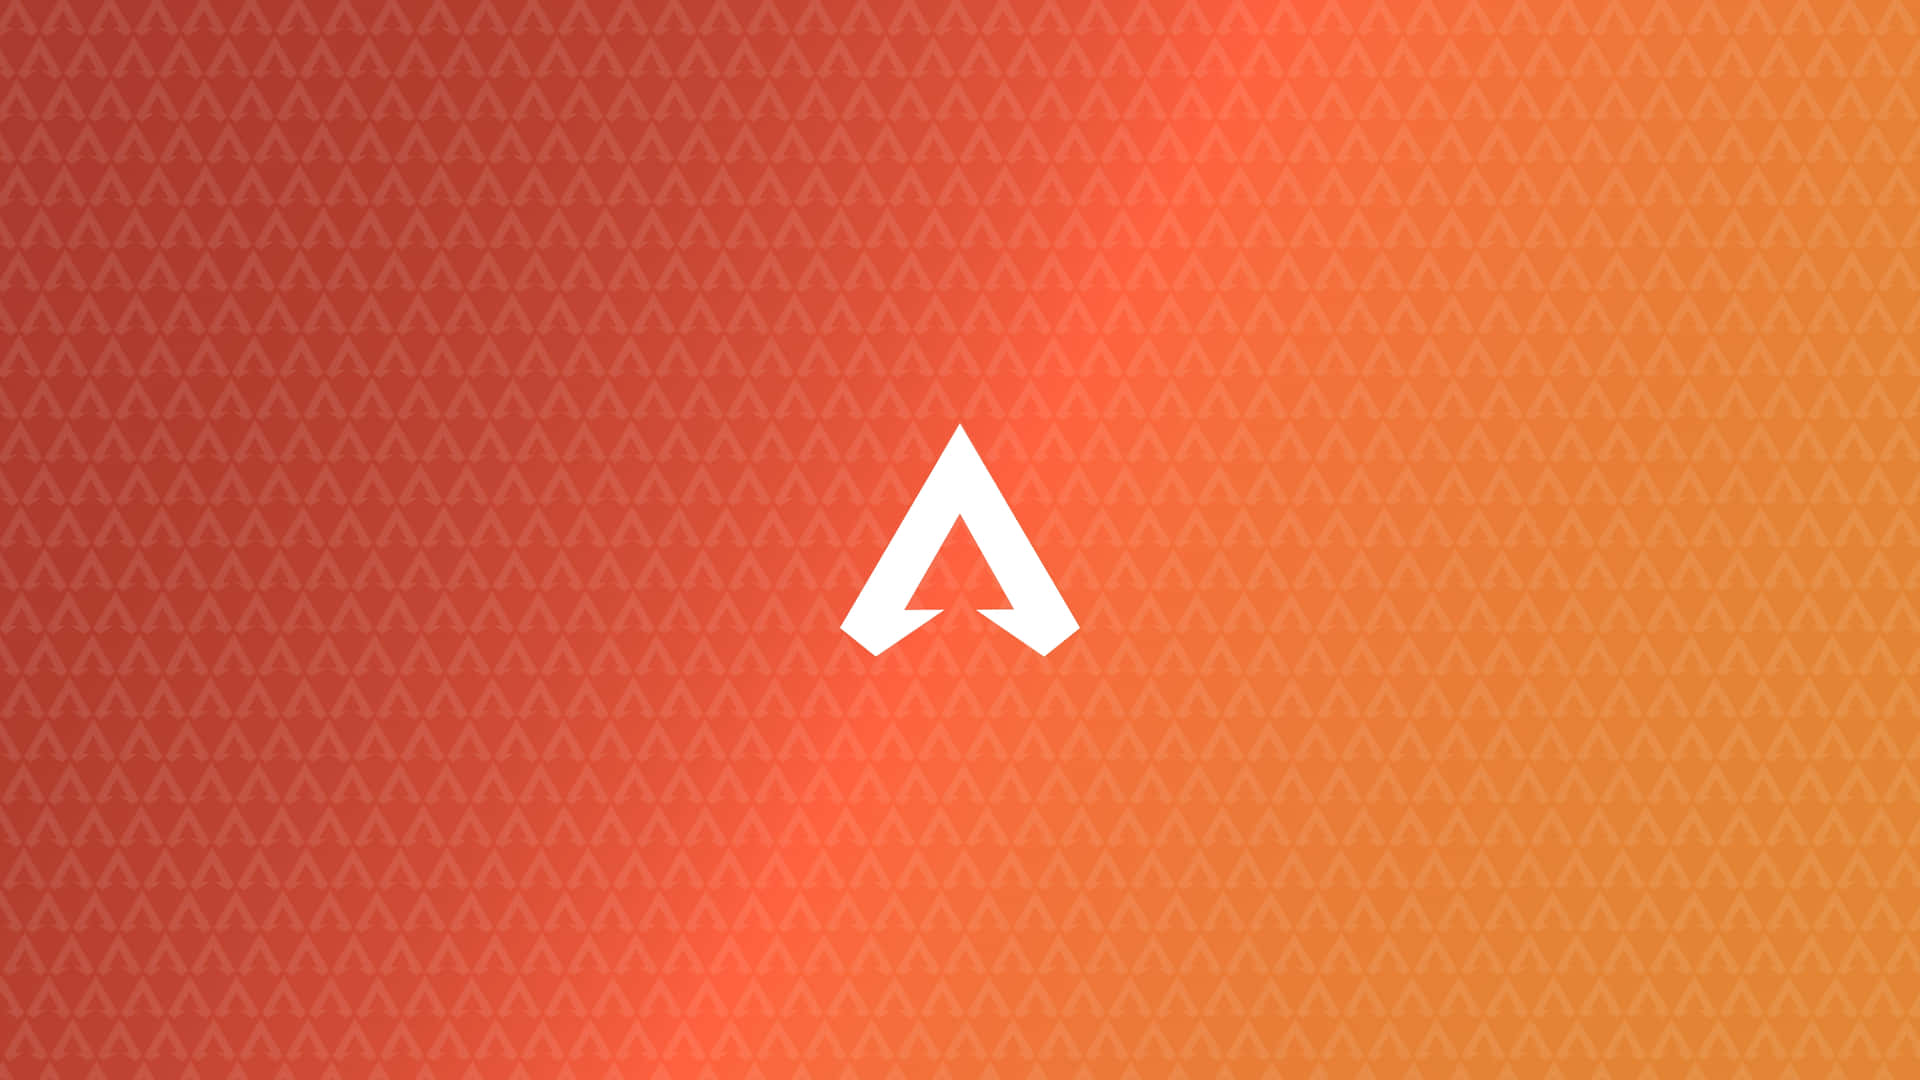 A Logo With An Orange And Red Background